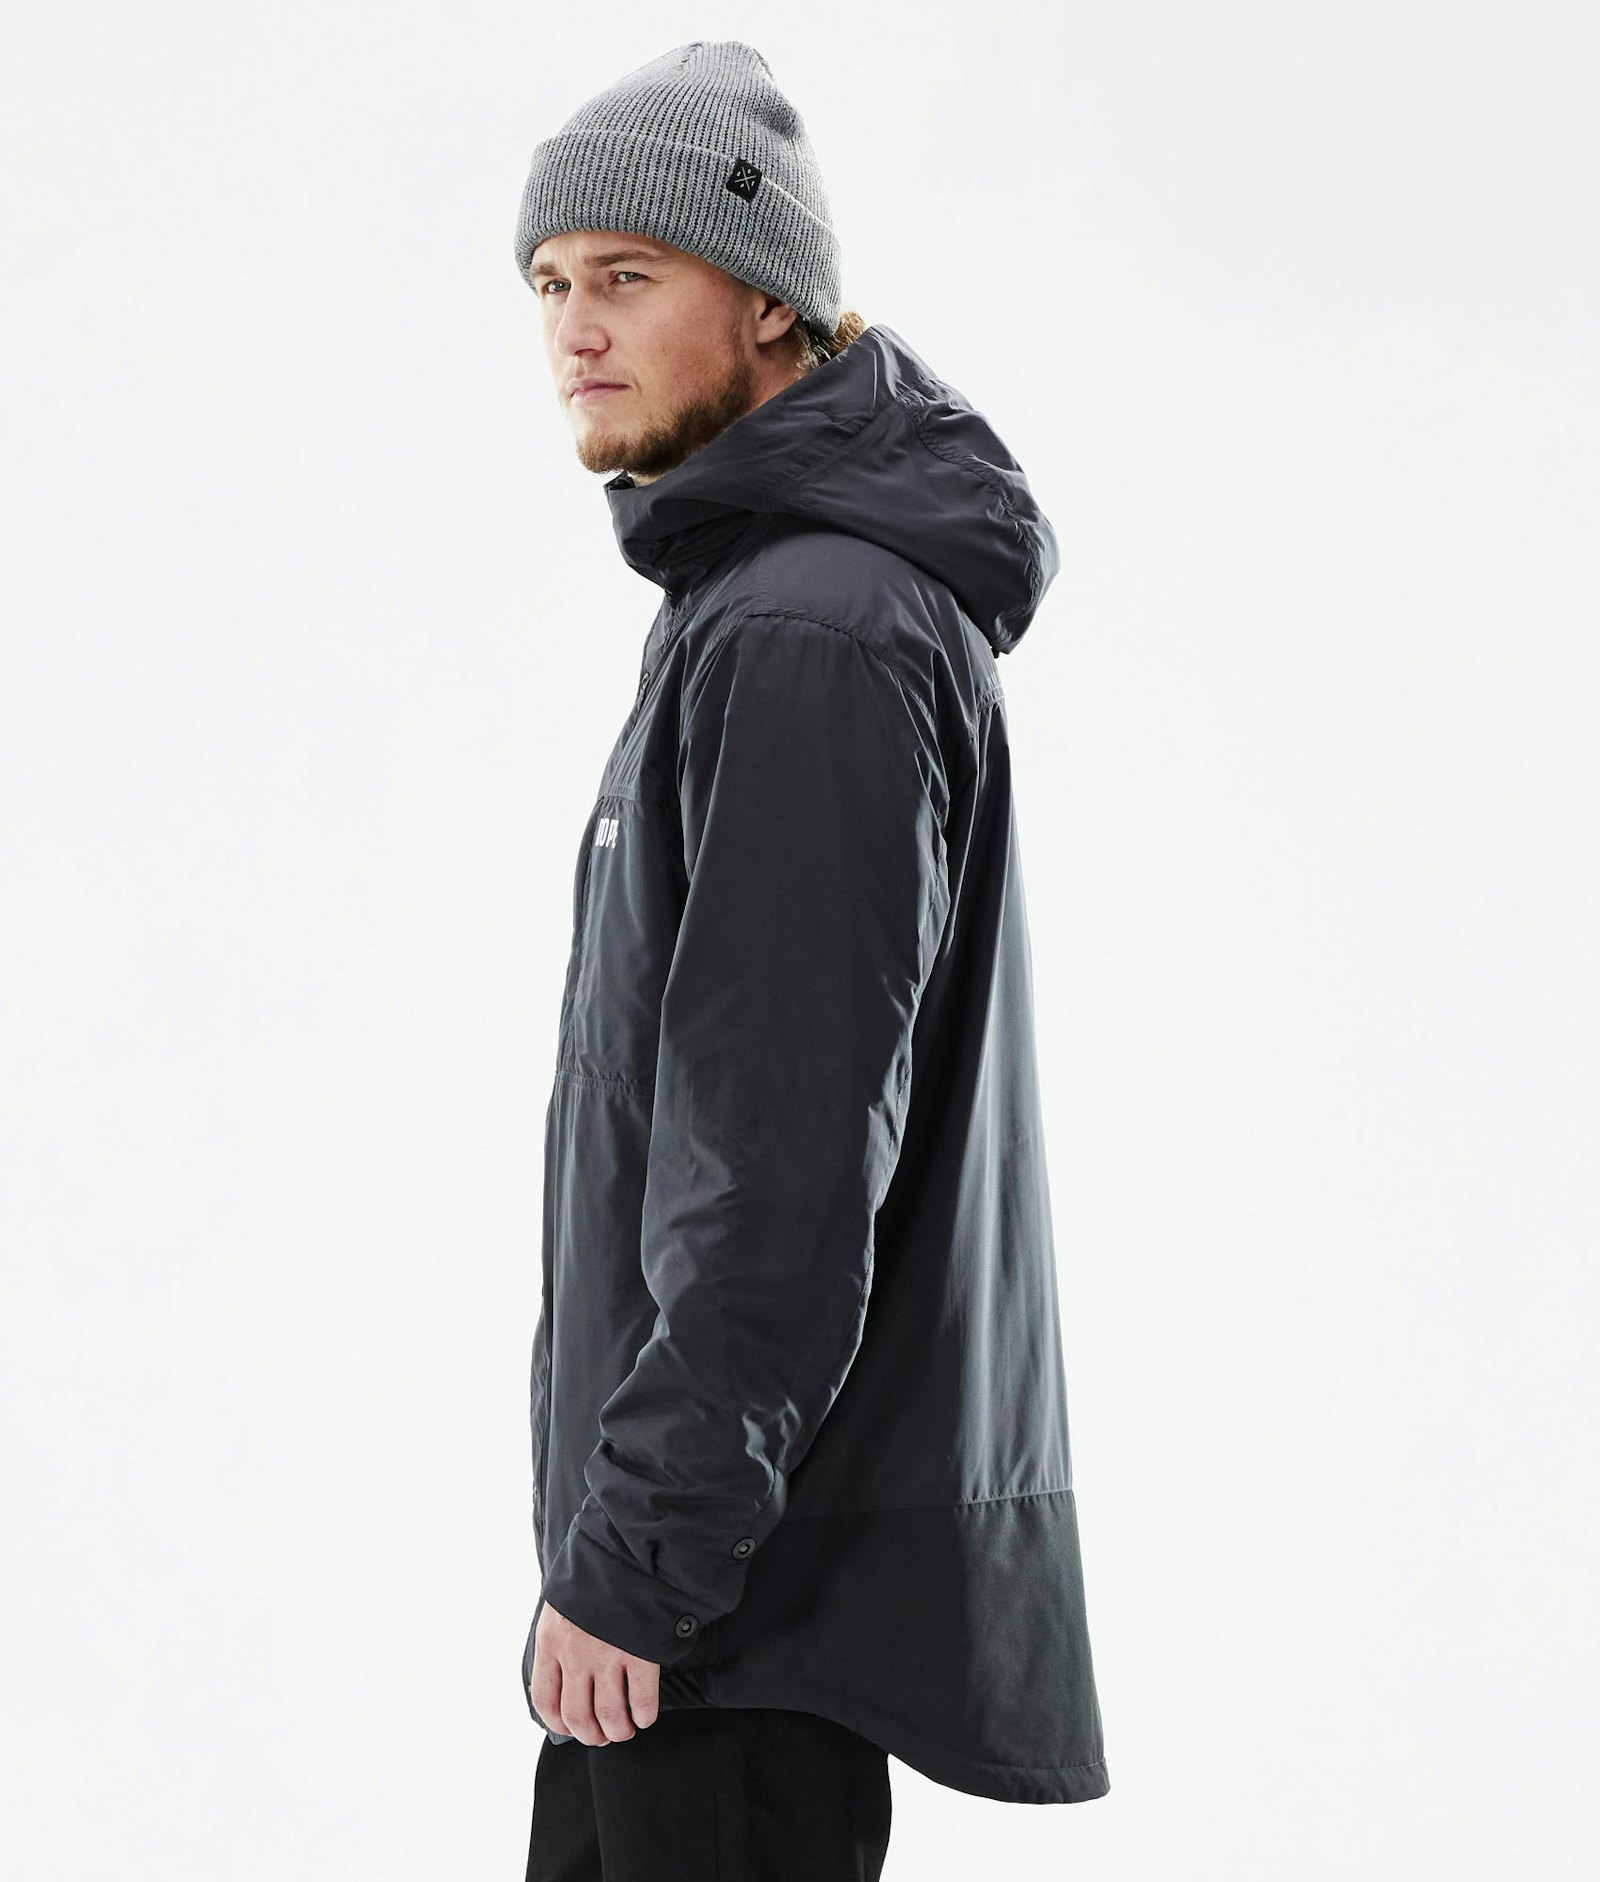 Dope Insulated Giacca Midlayer Outdoor Uomo Black